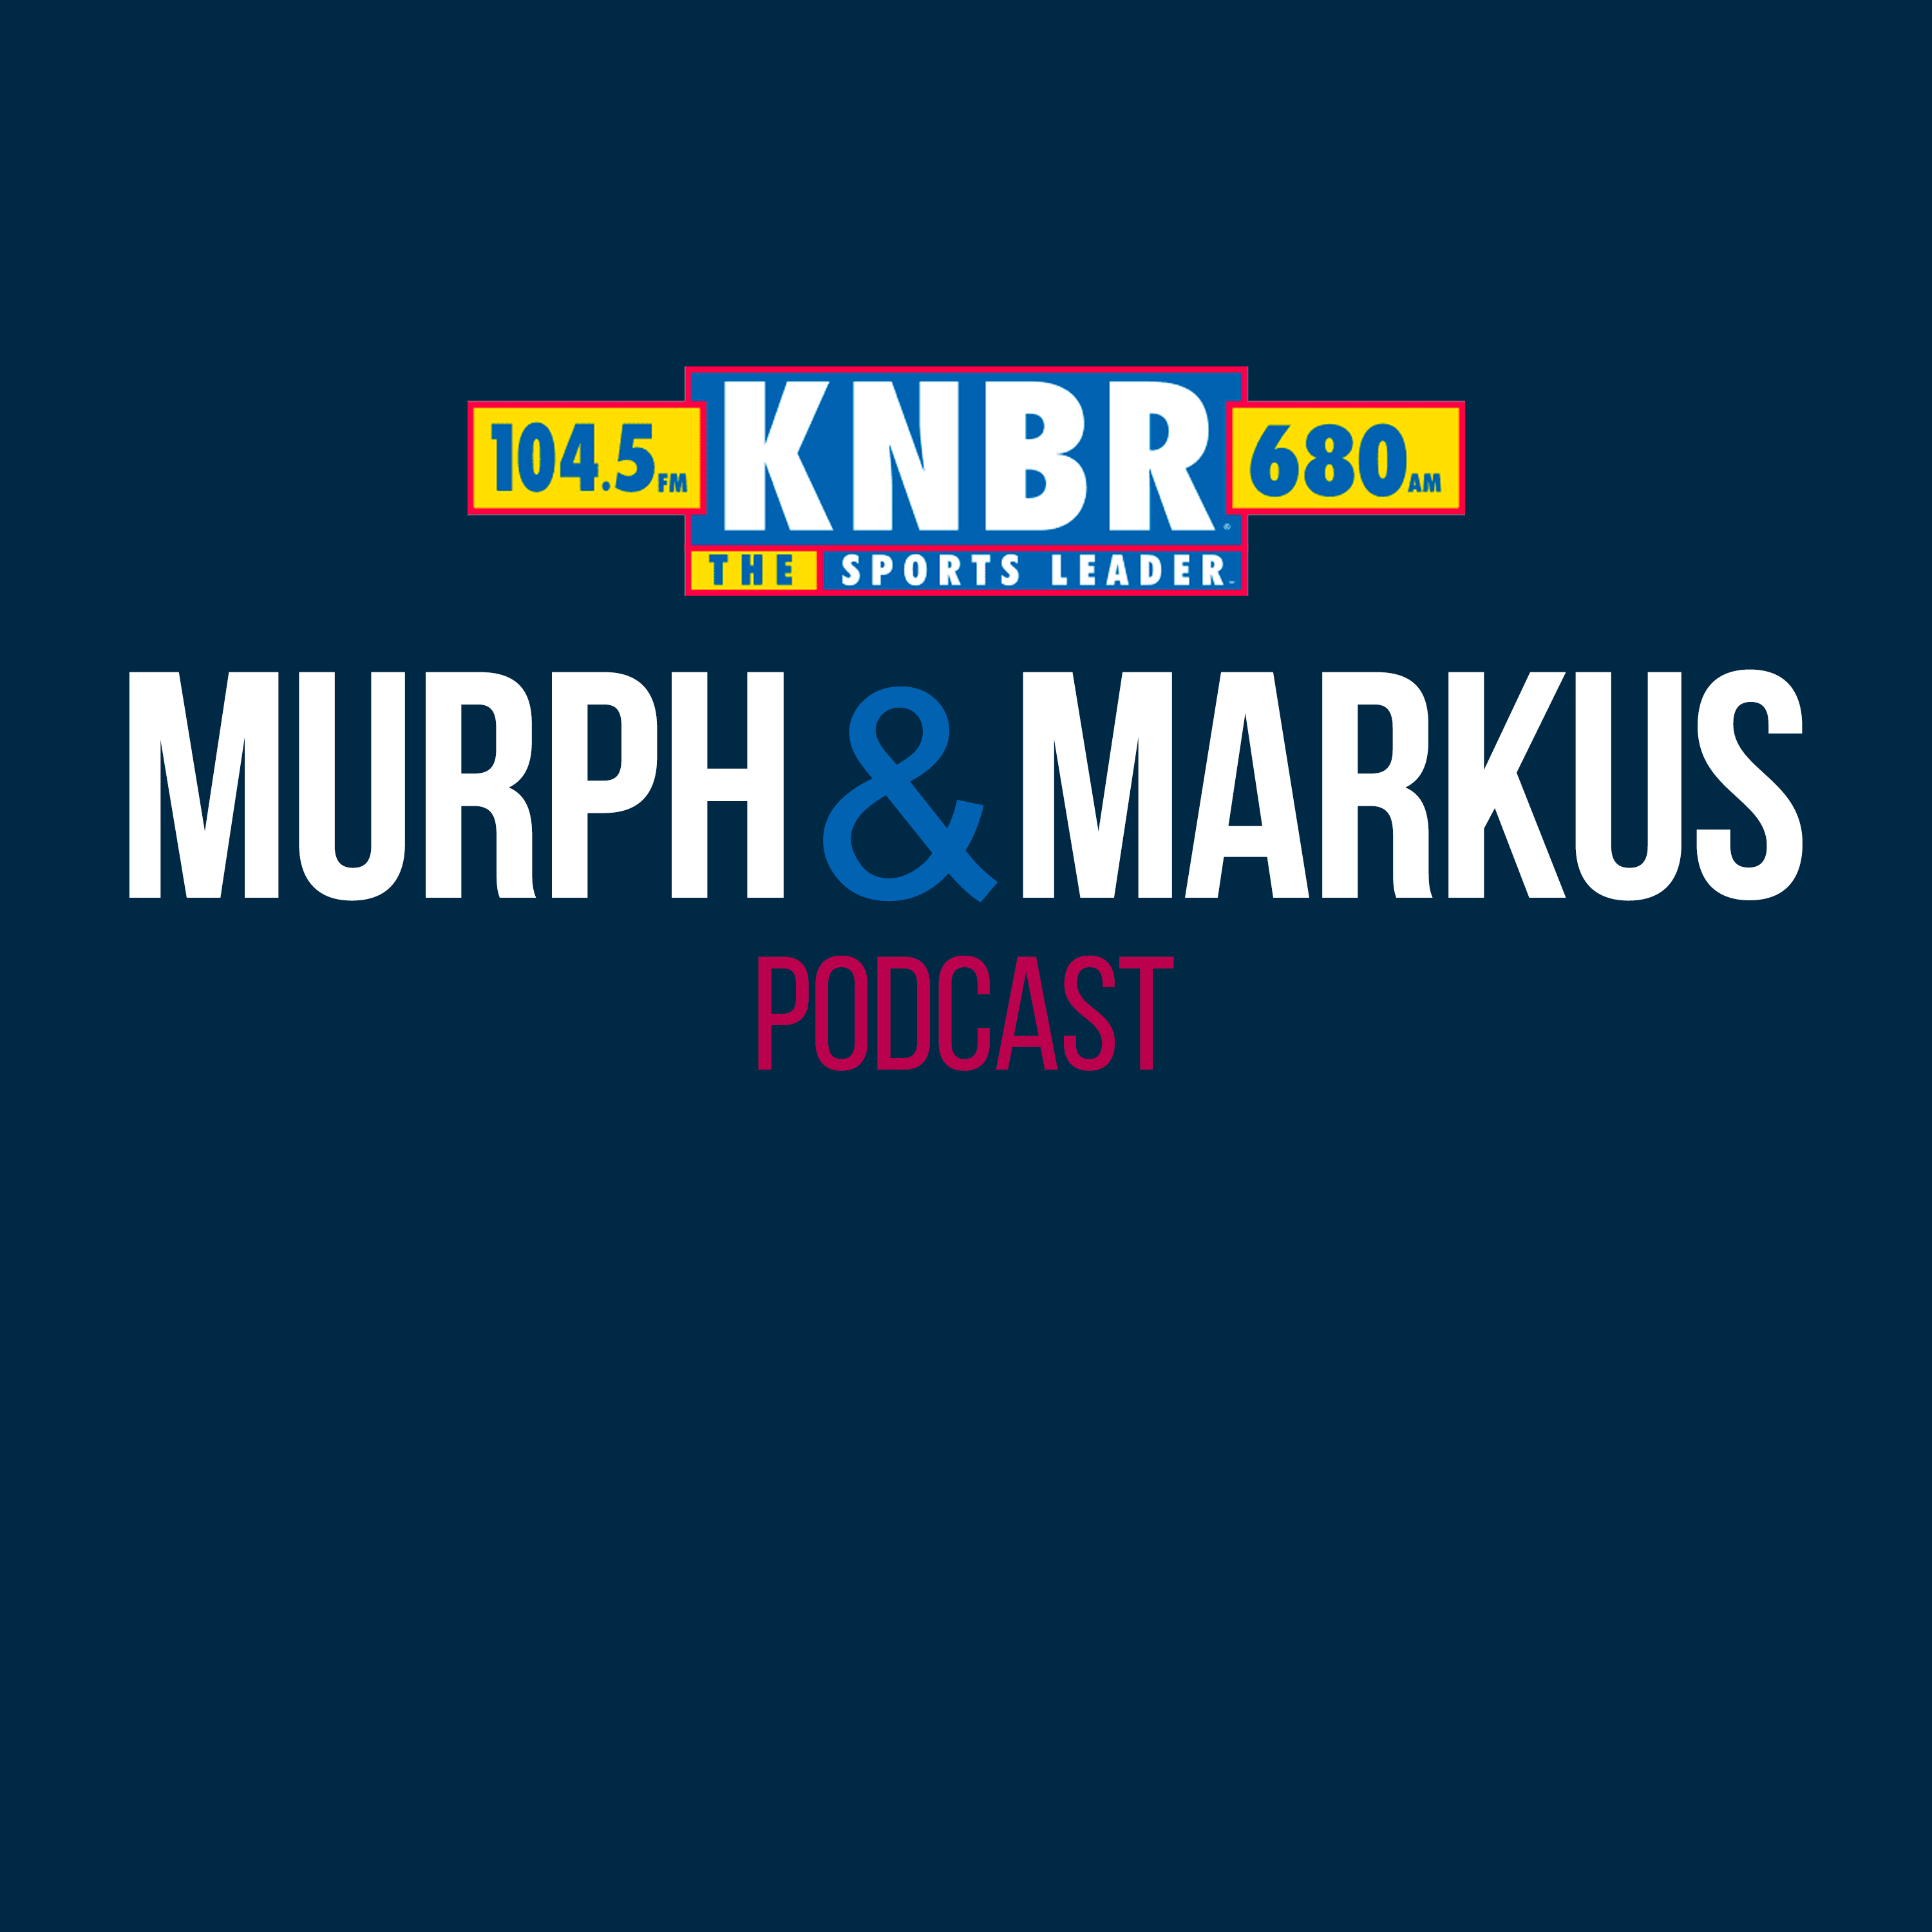 7-22 Jerry Hairston Jr. joins Murph and Markus to help preview the upcoming Giants vs Dodger series